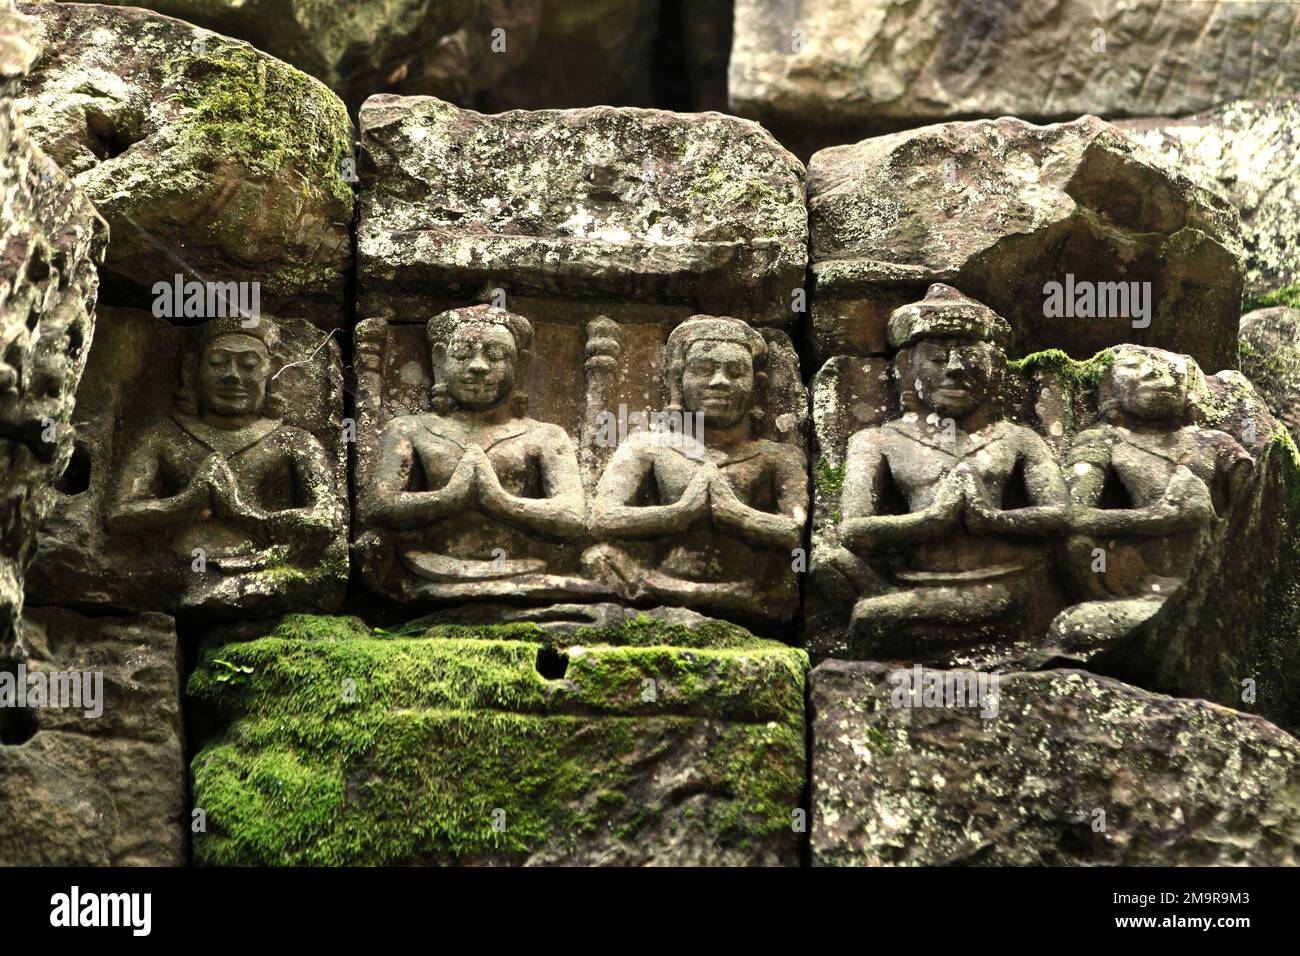 Reliefs of seated man in meditative posture, at Preah Khan temple in Siem Reap, Cambodia. Stock Photo